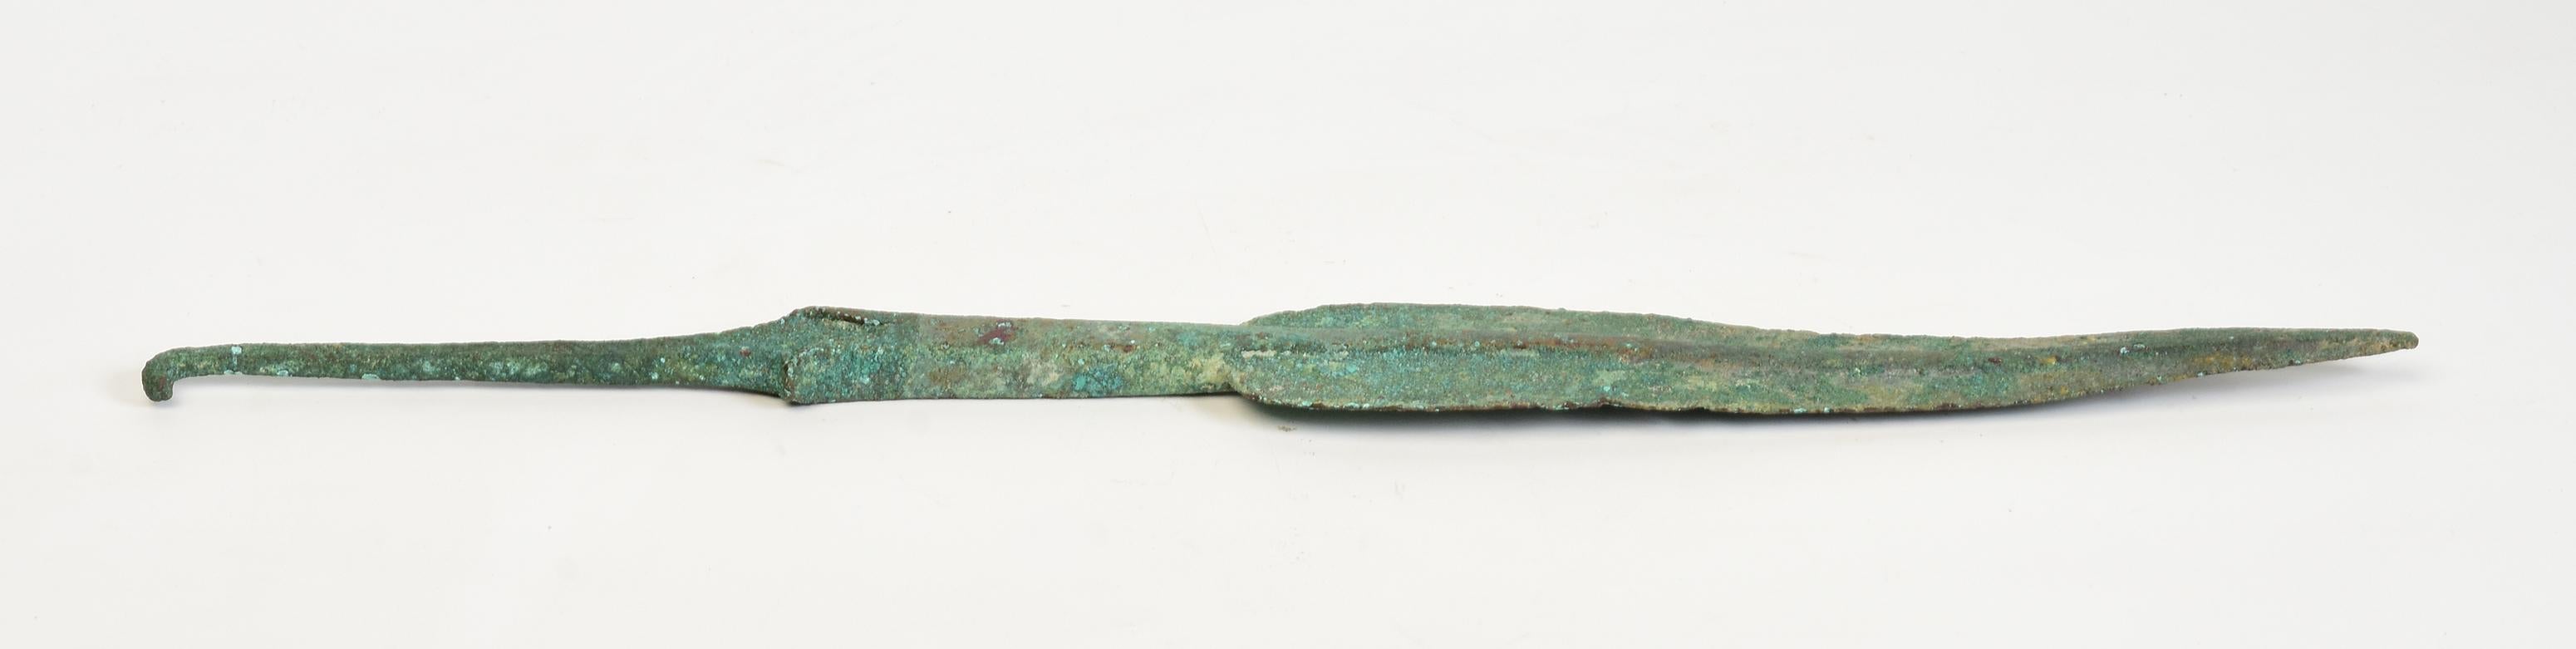 Ancient Antique Luristan Bronze Spear Early Iron Age Weapon For Sale 4